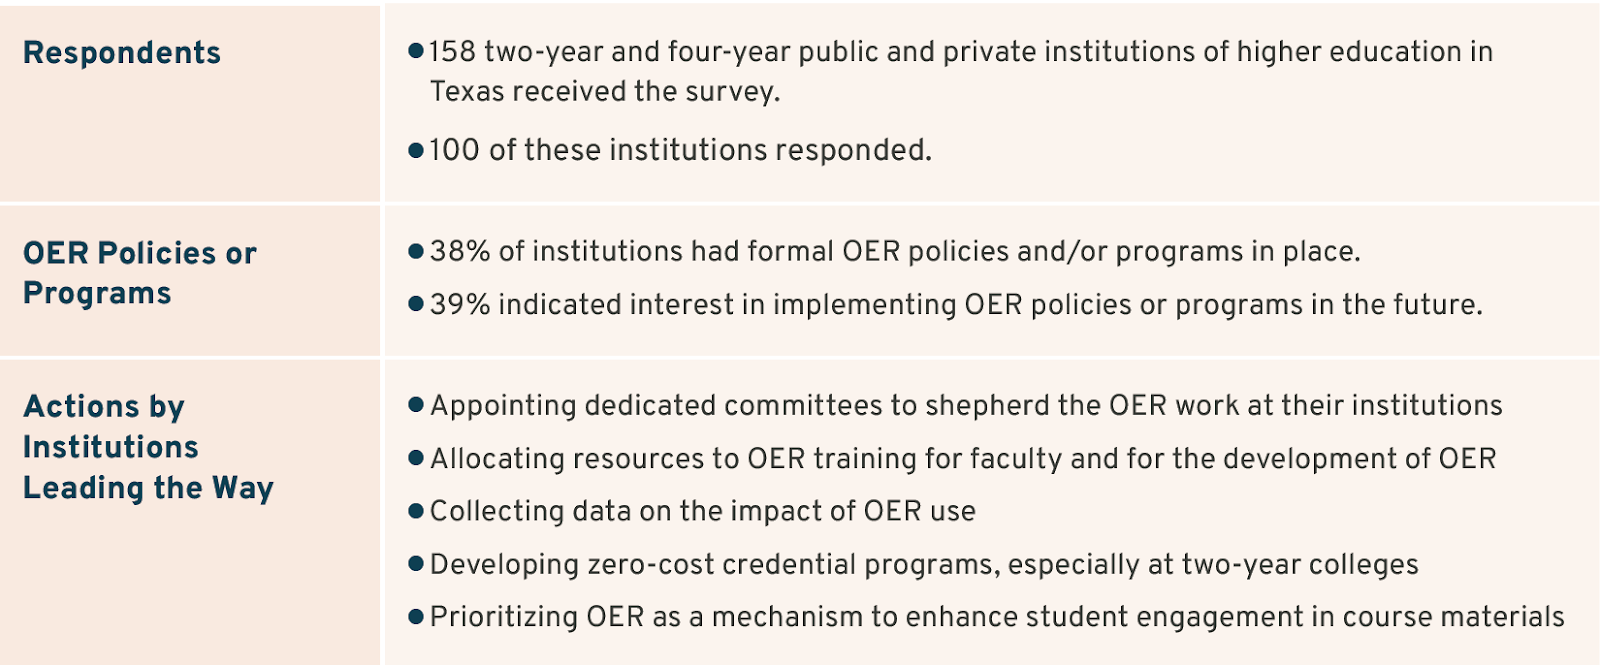 2019 OER Survey & Landscape Analysis Selected Findings